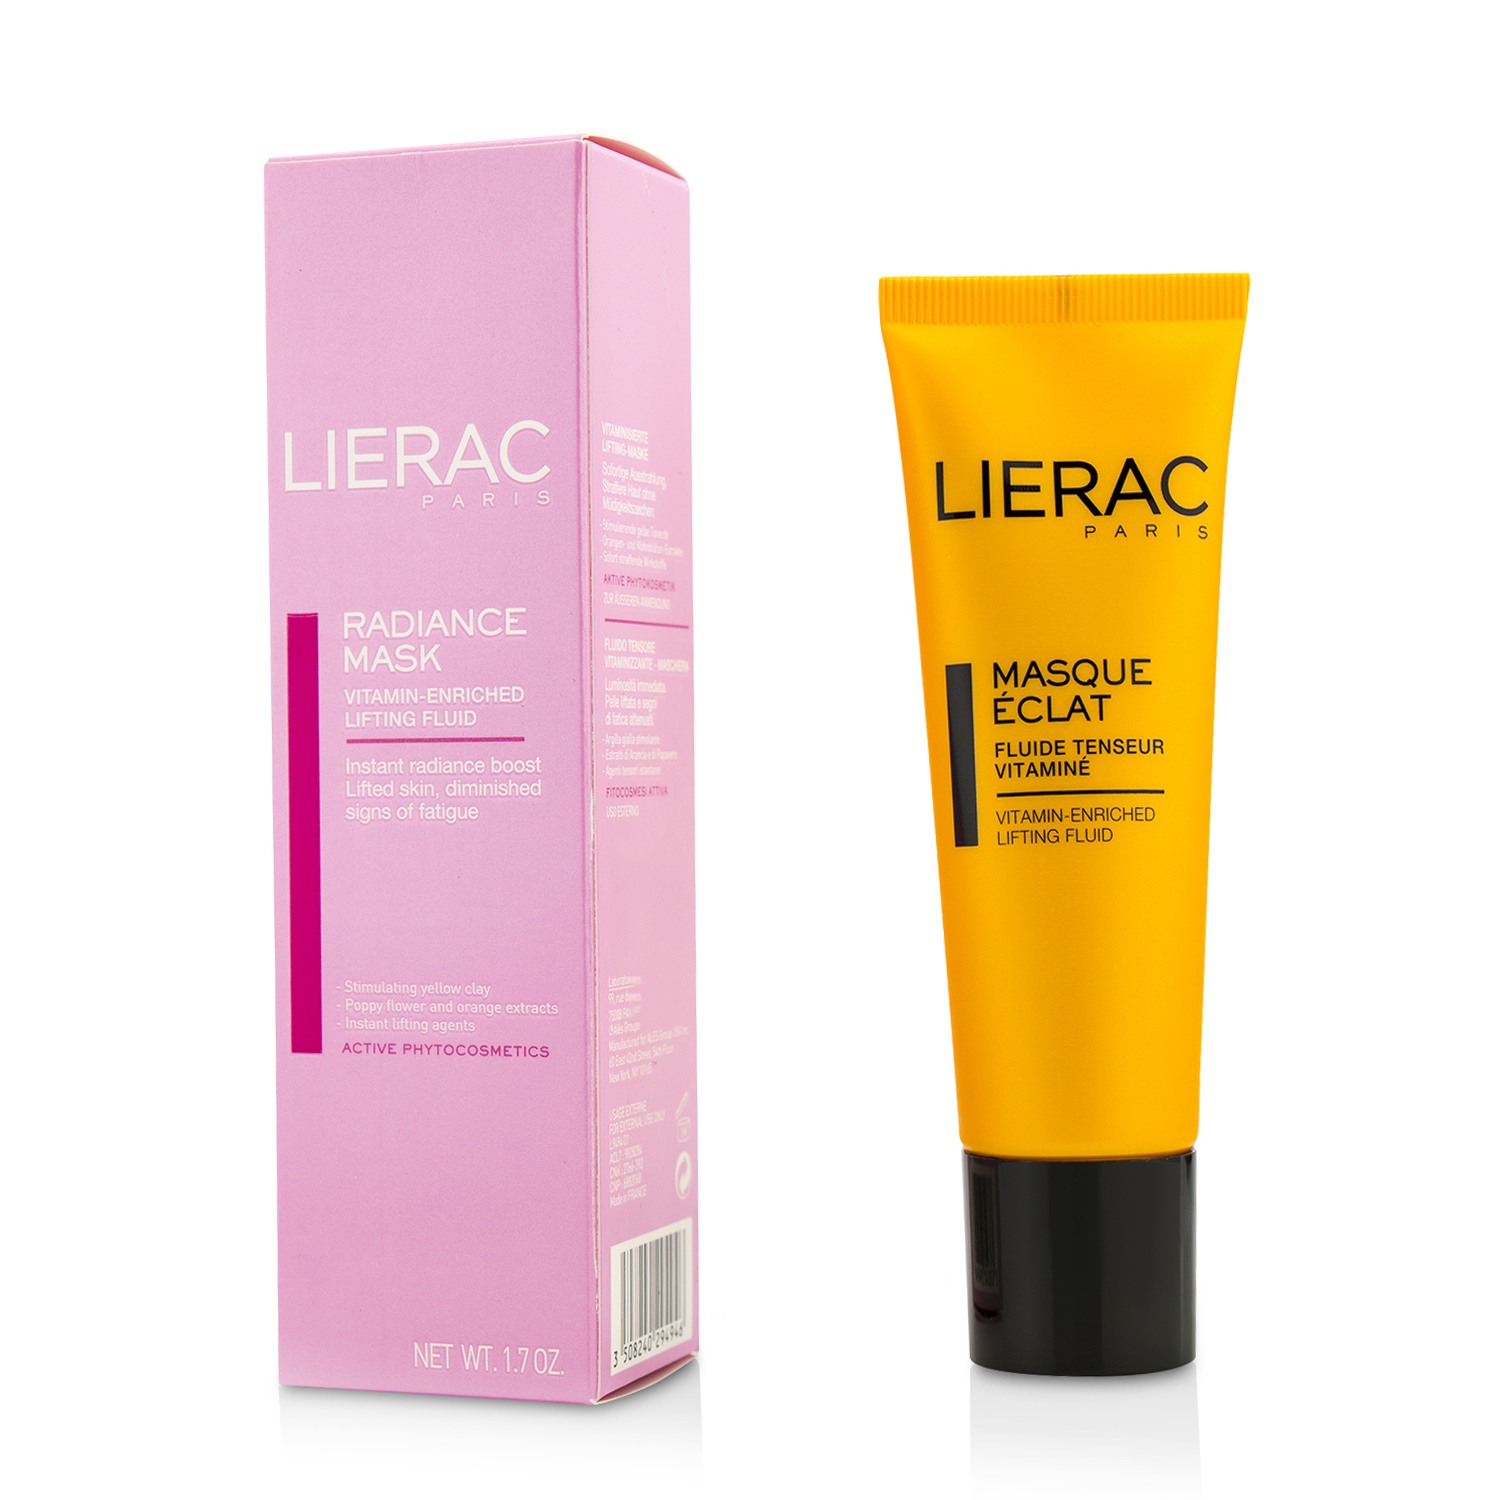 Radiance Mask Vitamin-Enriched Lifting Fluid Lierac Image